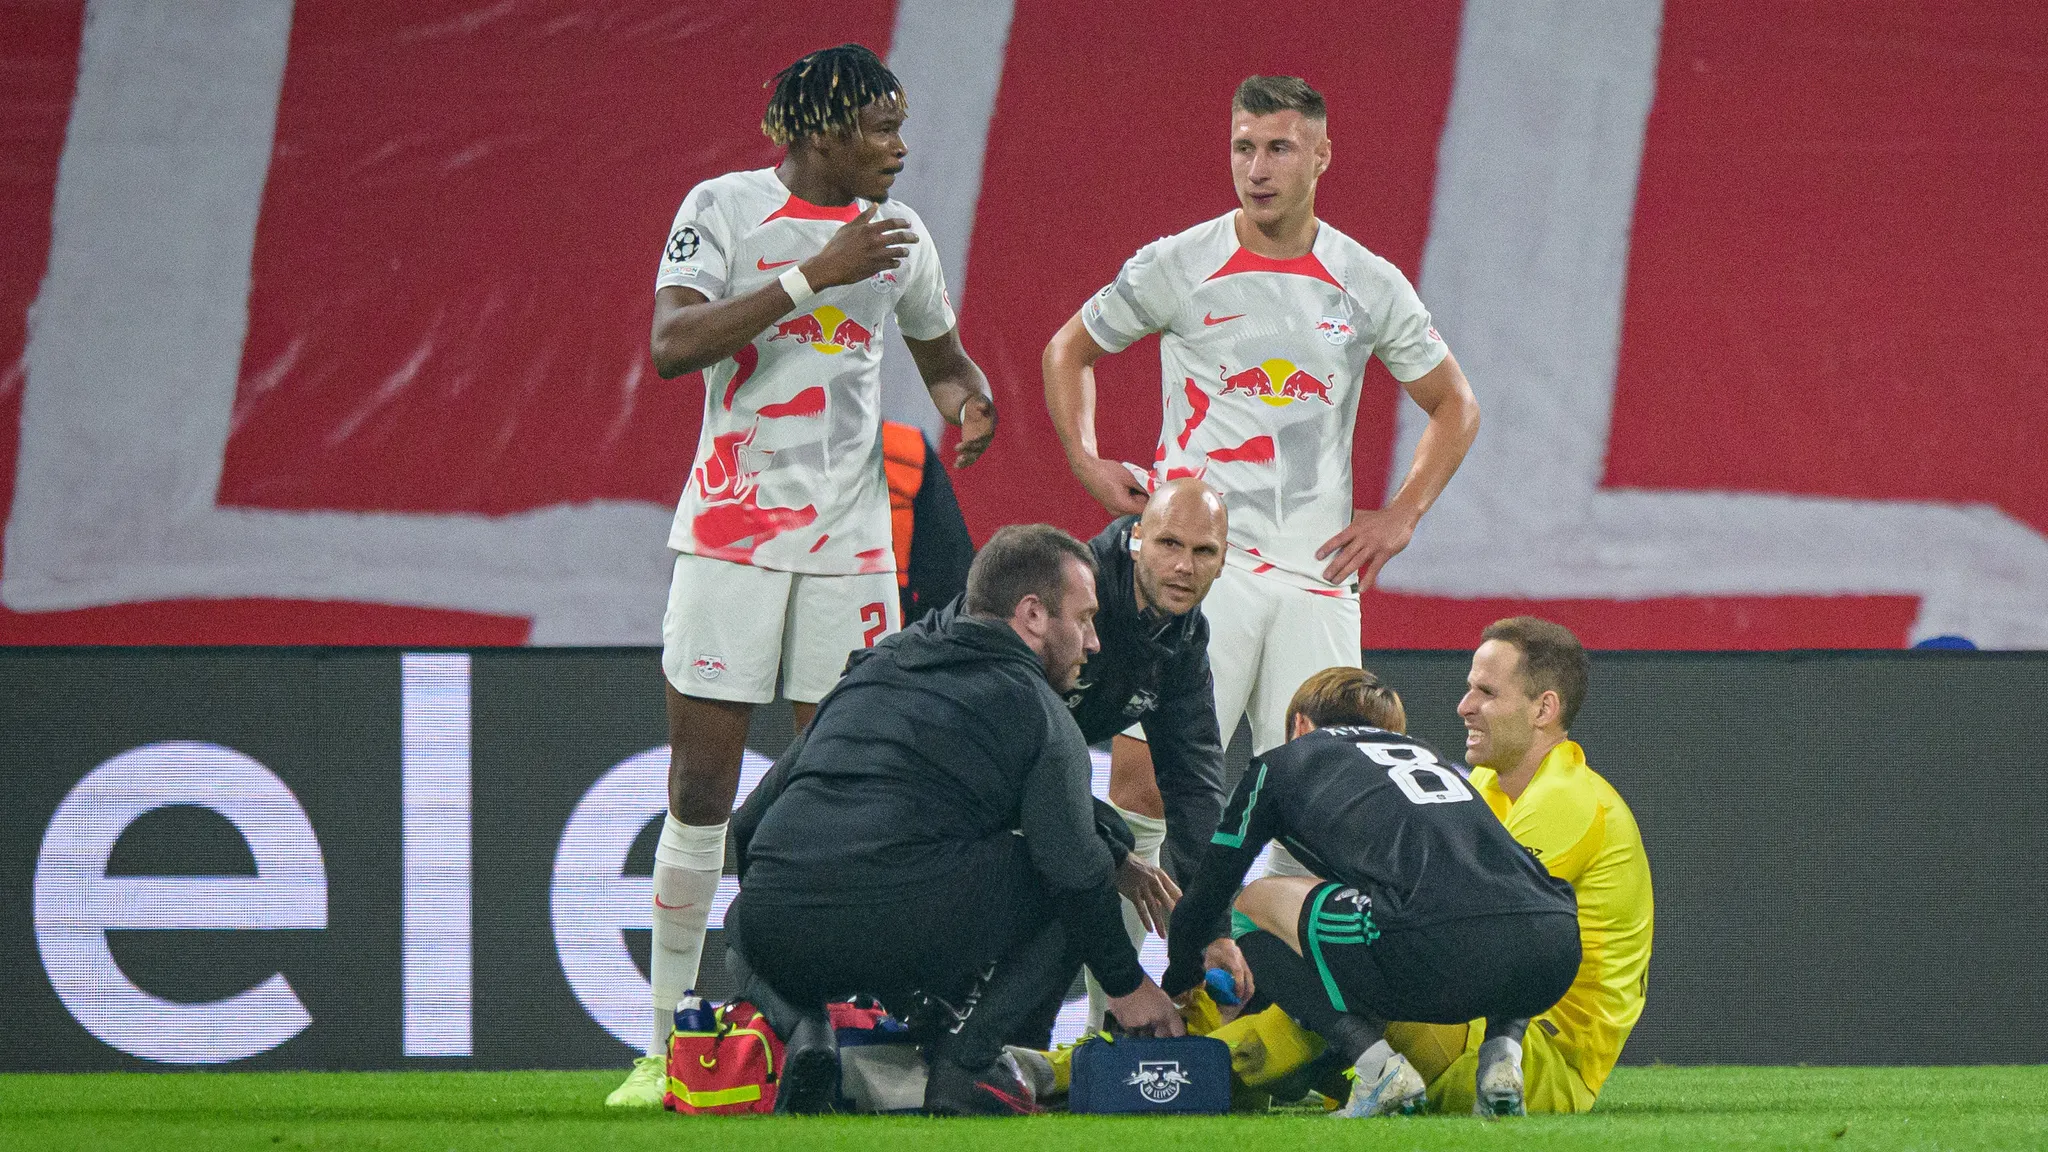 Peter Gulacsi injured in the game against Celtic - the beginning of a long break